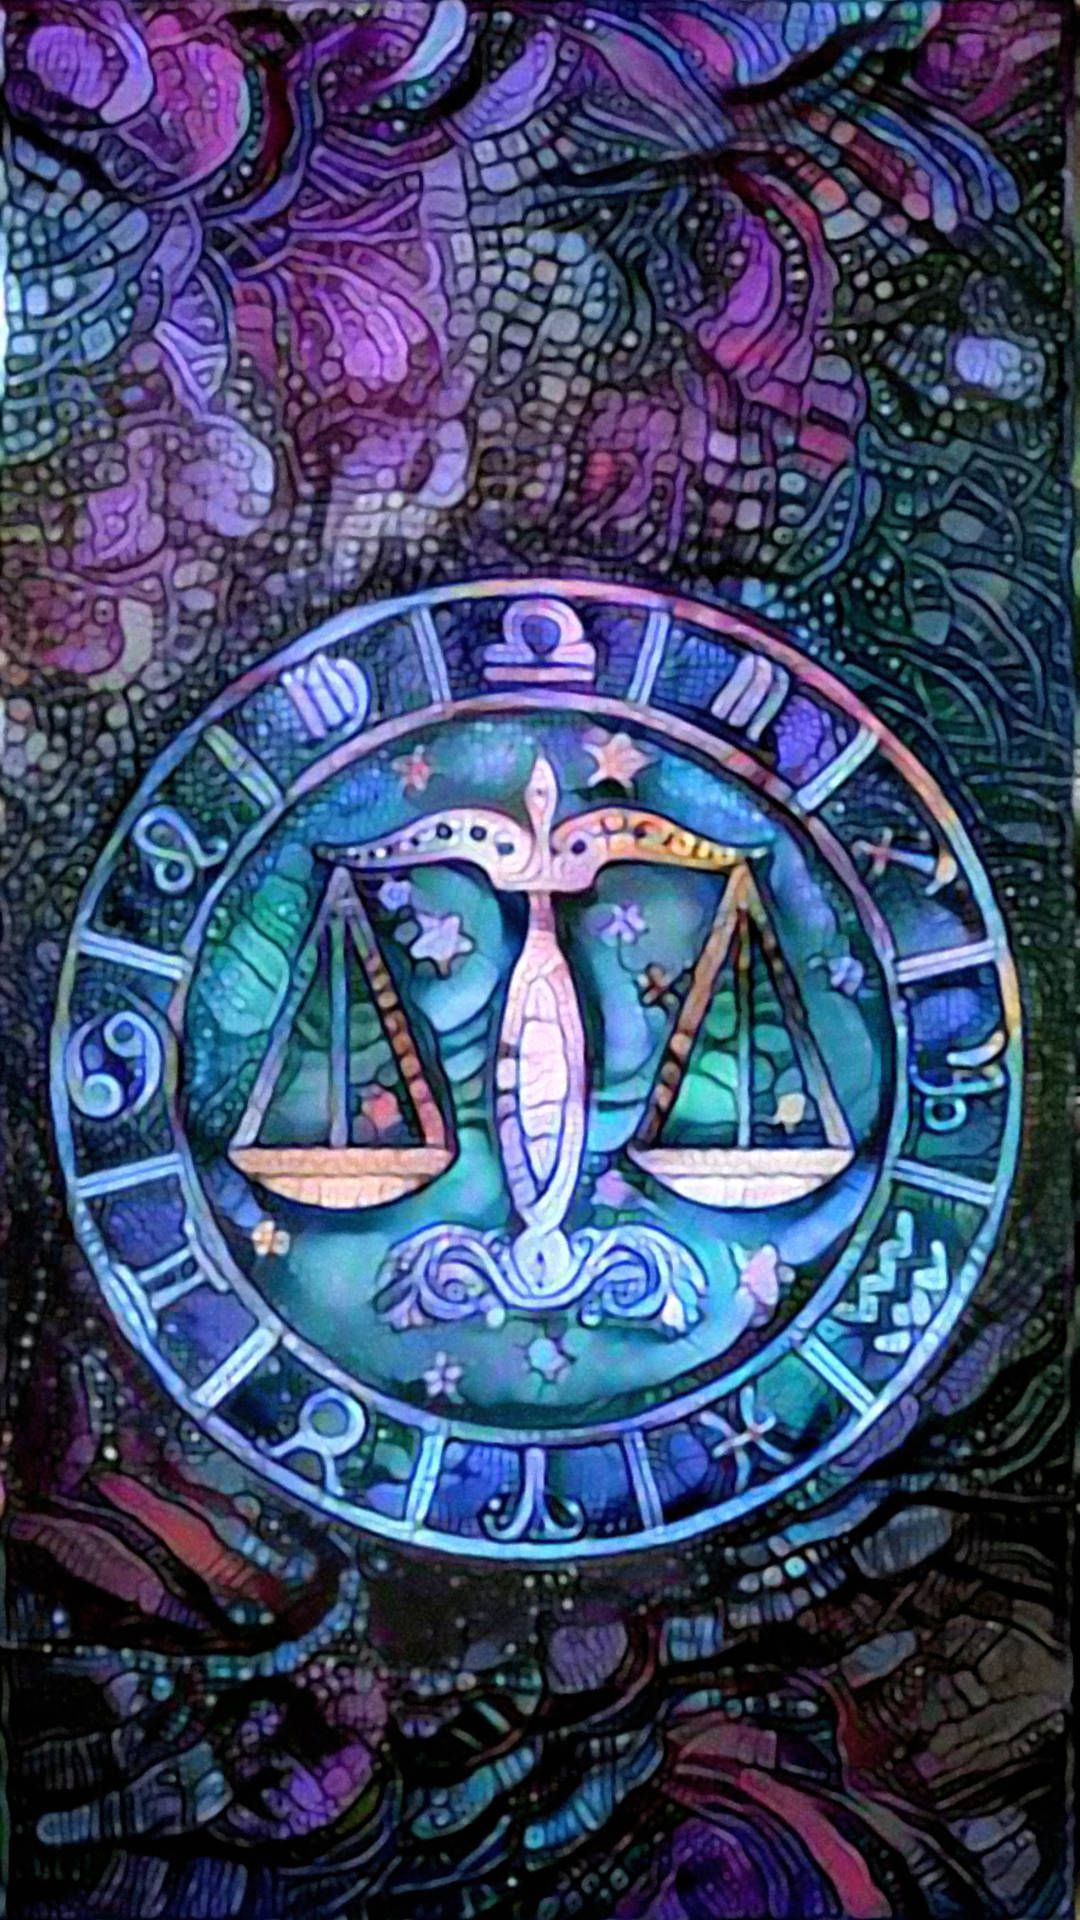 Libra, the scales, is the seventh sign of the zodiac. - Libra